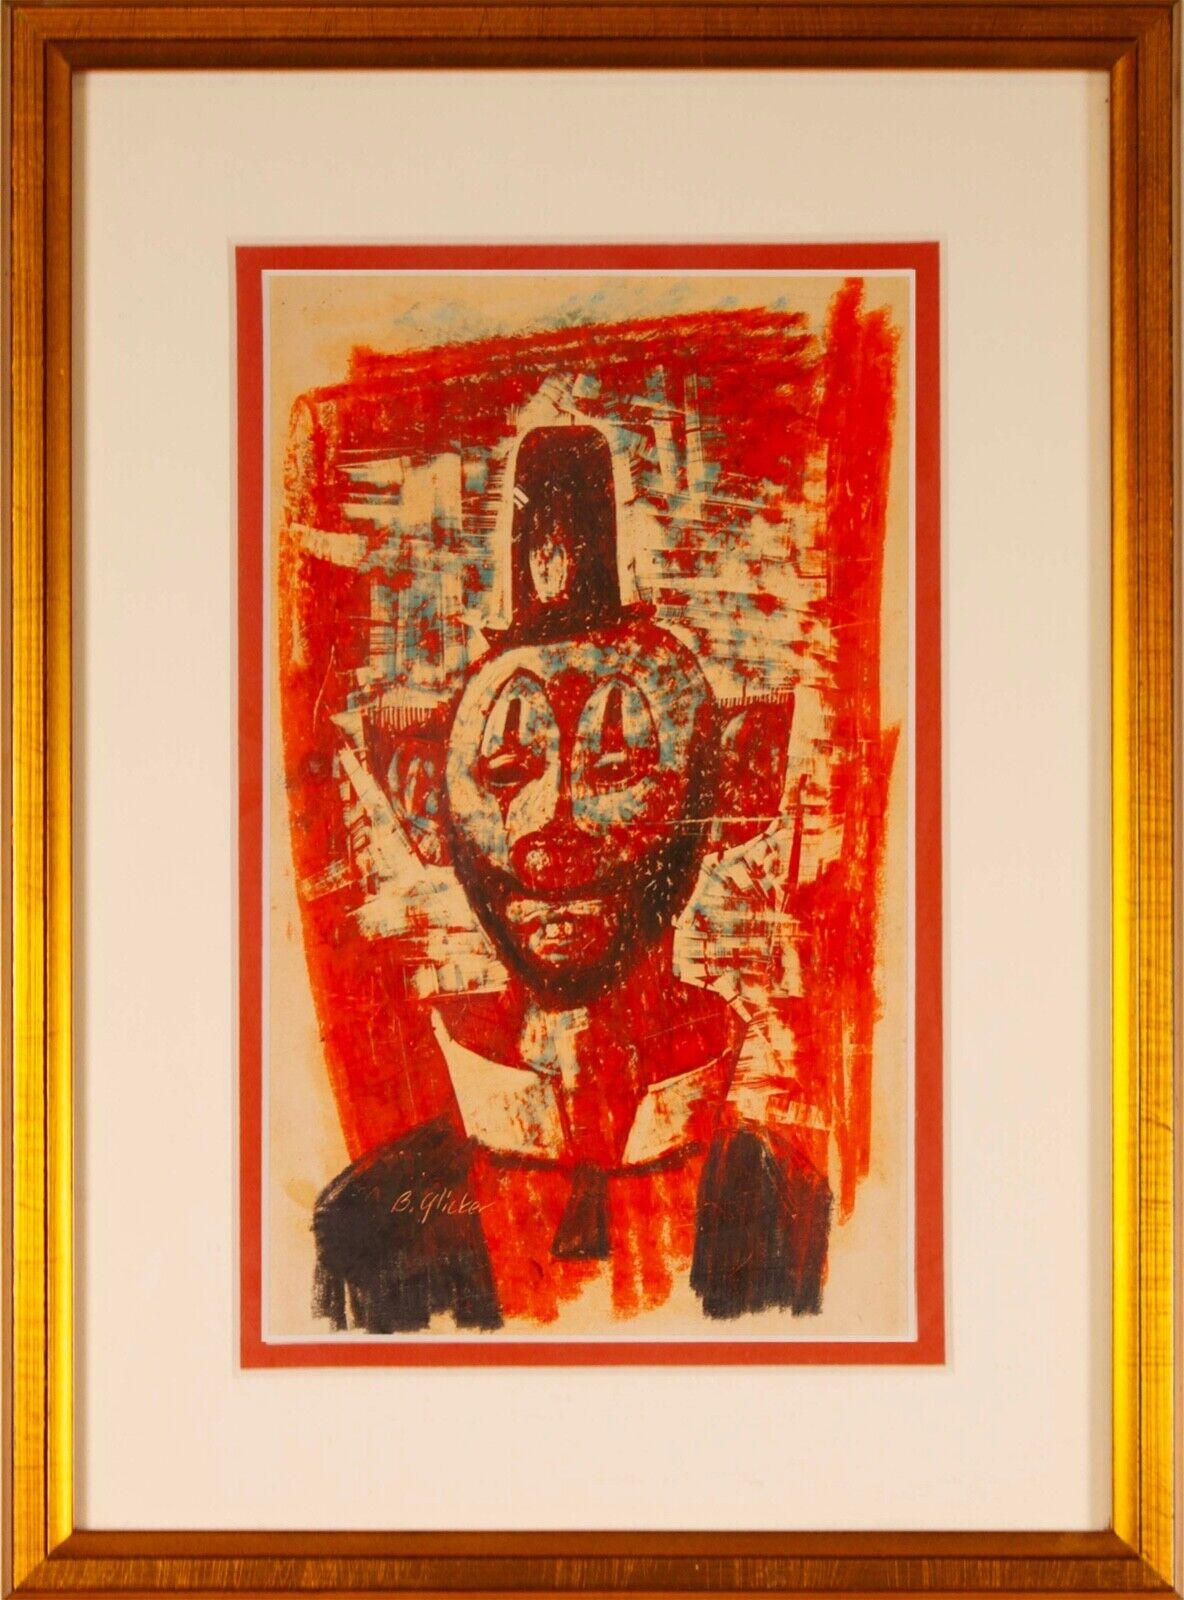 An expressive mid-century modern mixed media color graphite drawing on paper depicting a portrait of a clown by Michigan based artist Benjamin Glicker. Signed bottom right. Circa 1960s. Benjamin Glicker was an influential teacher in Michigan